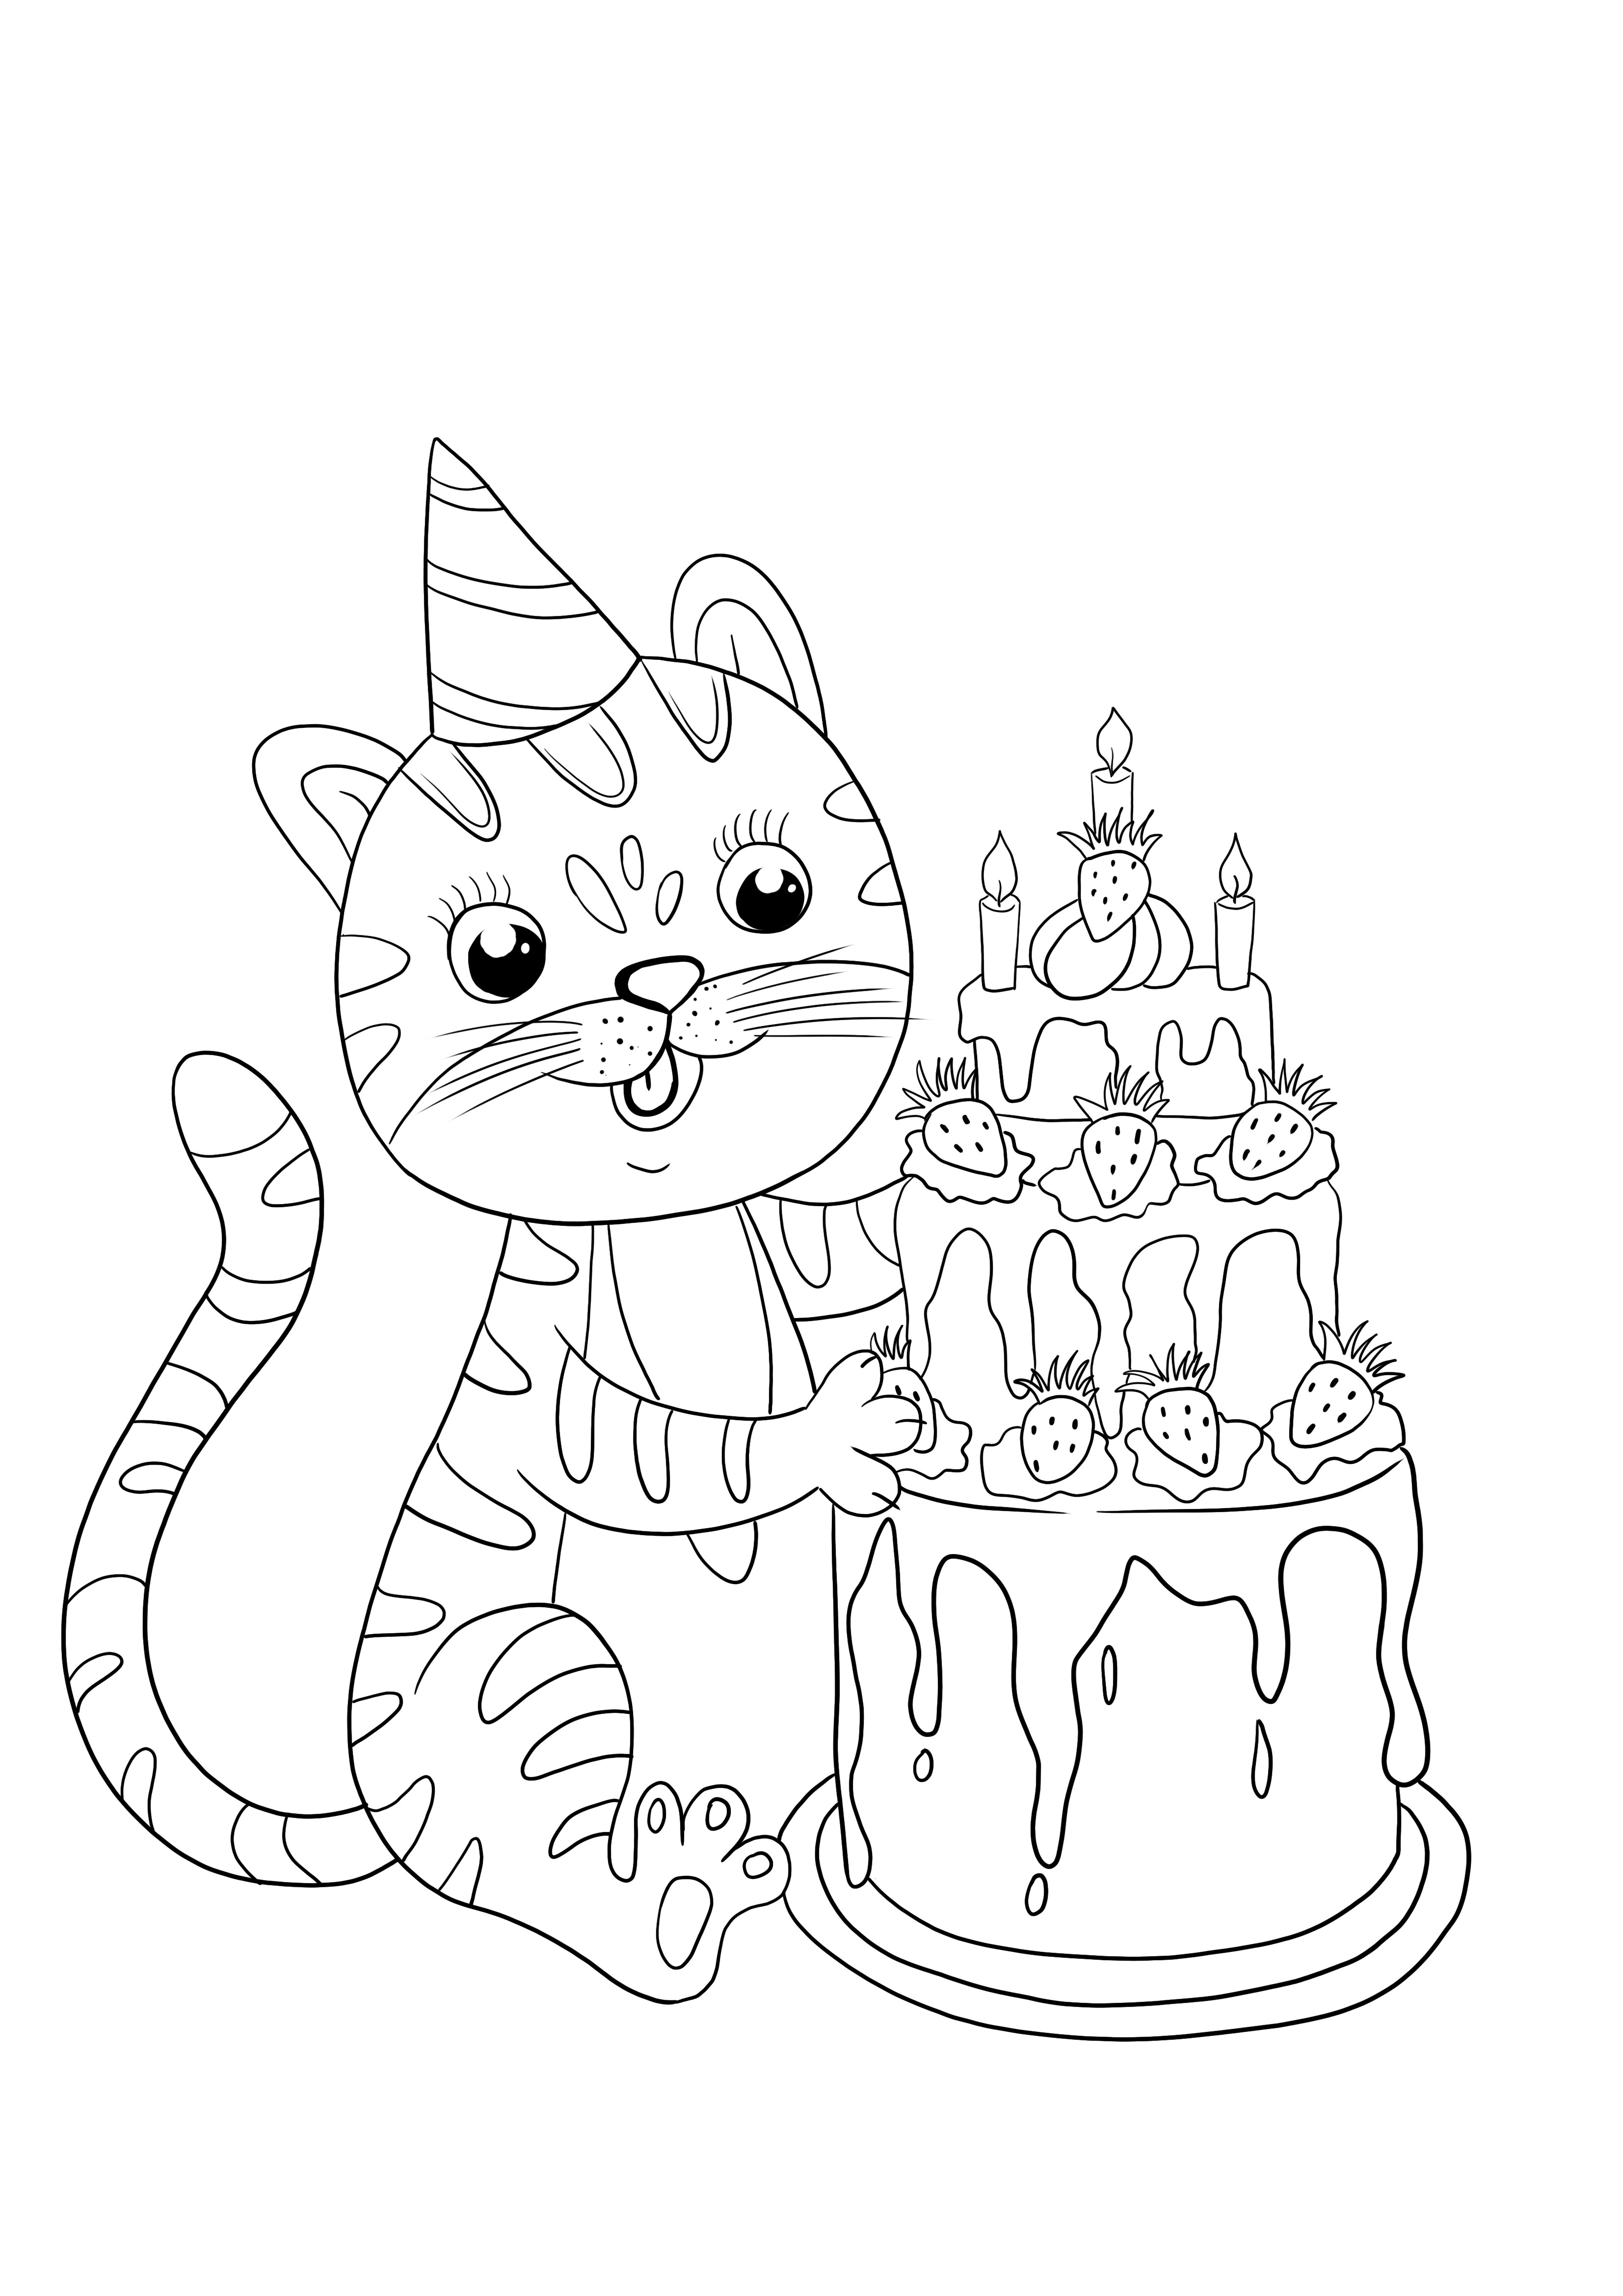 Birthday cat card for children to color and print